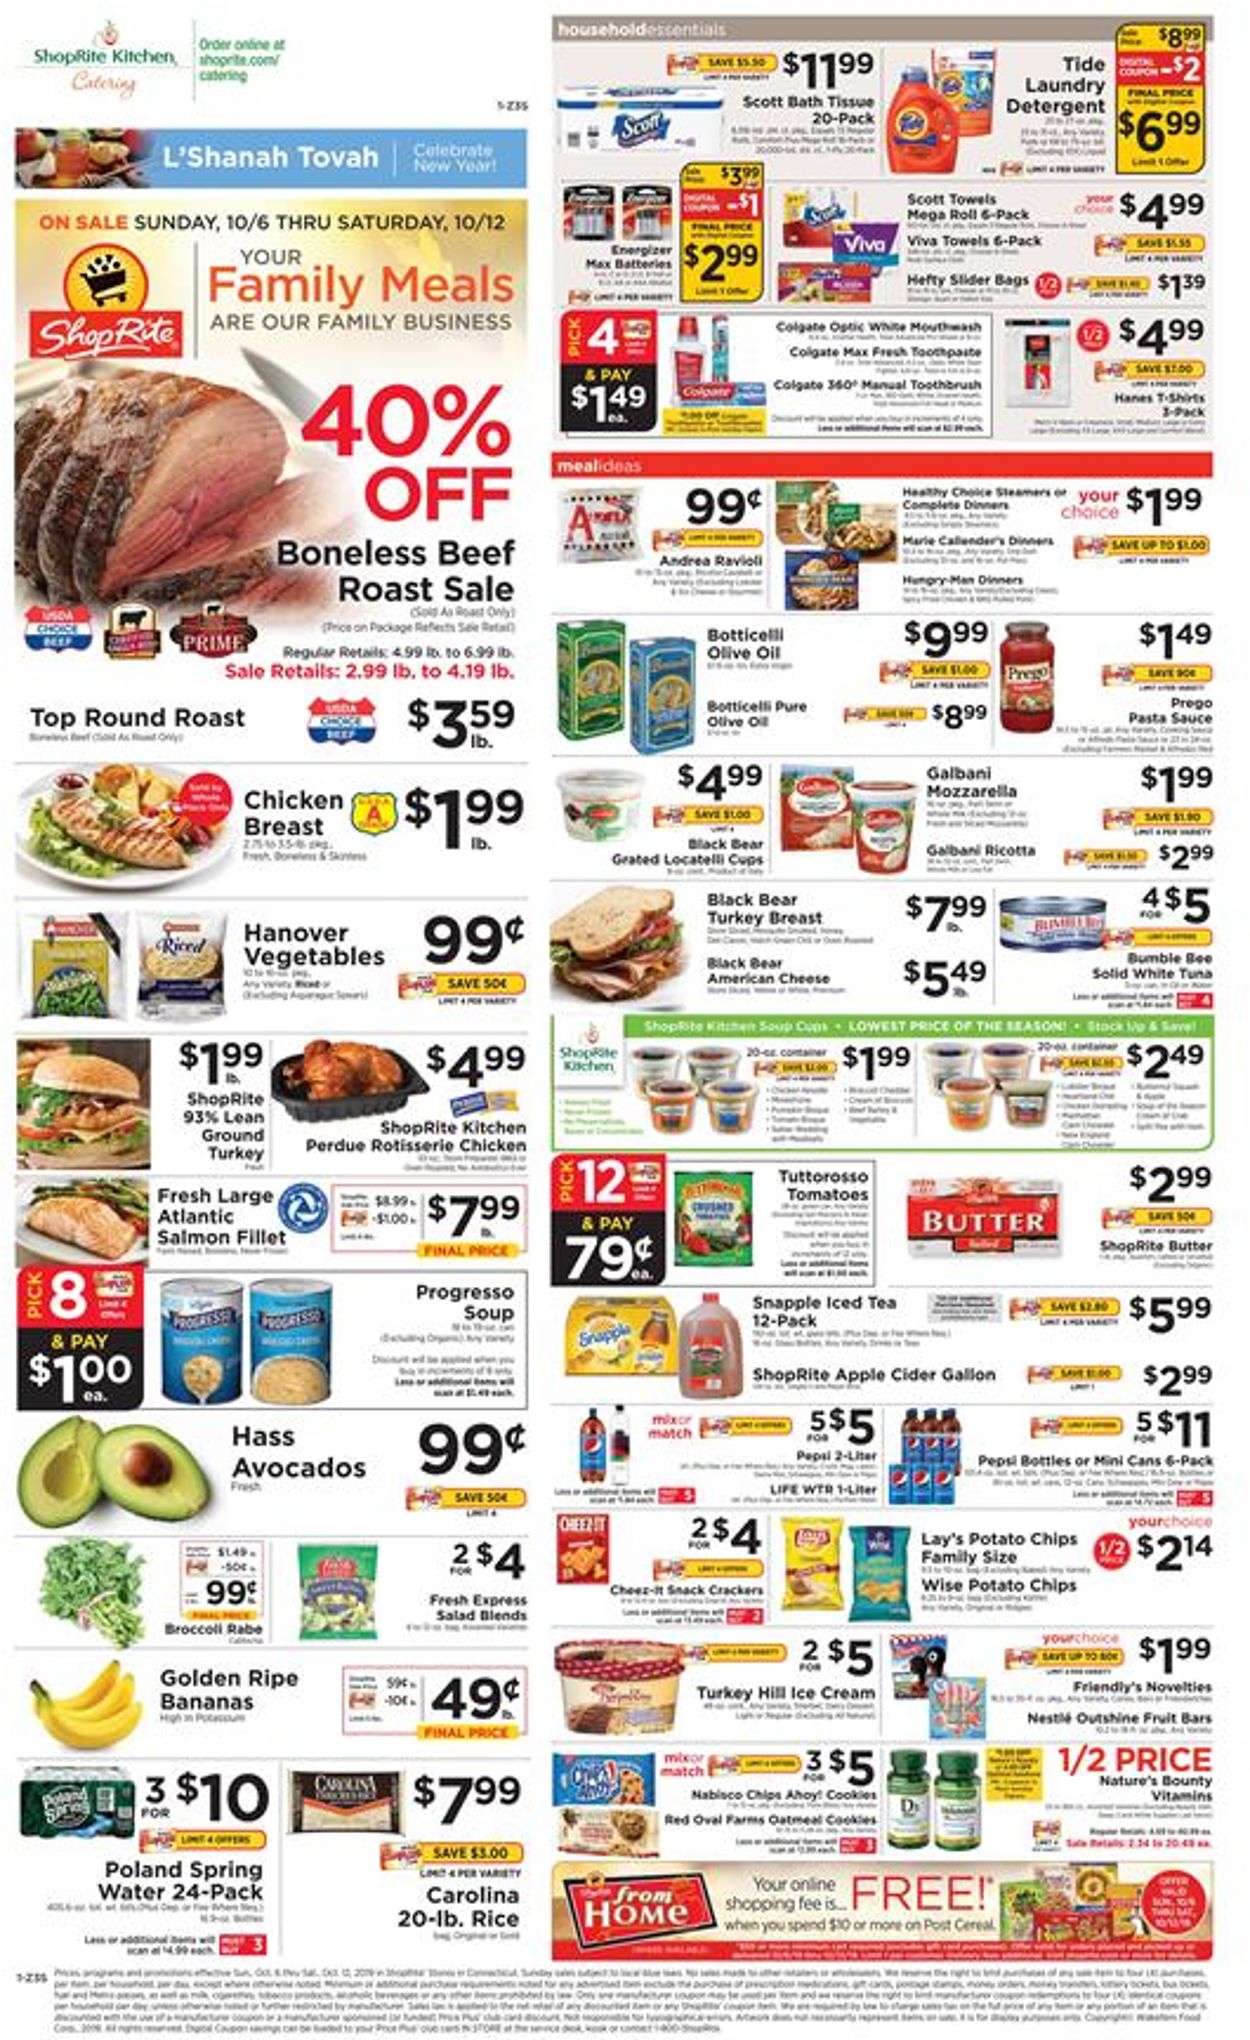 ShopRite Current weekly ad 10/06 - 10/12/2019 - frequent-ads.com